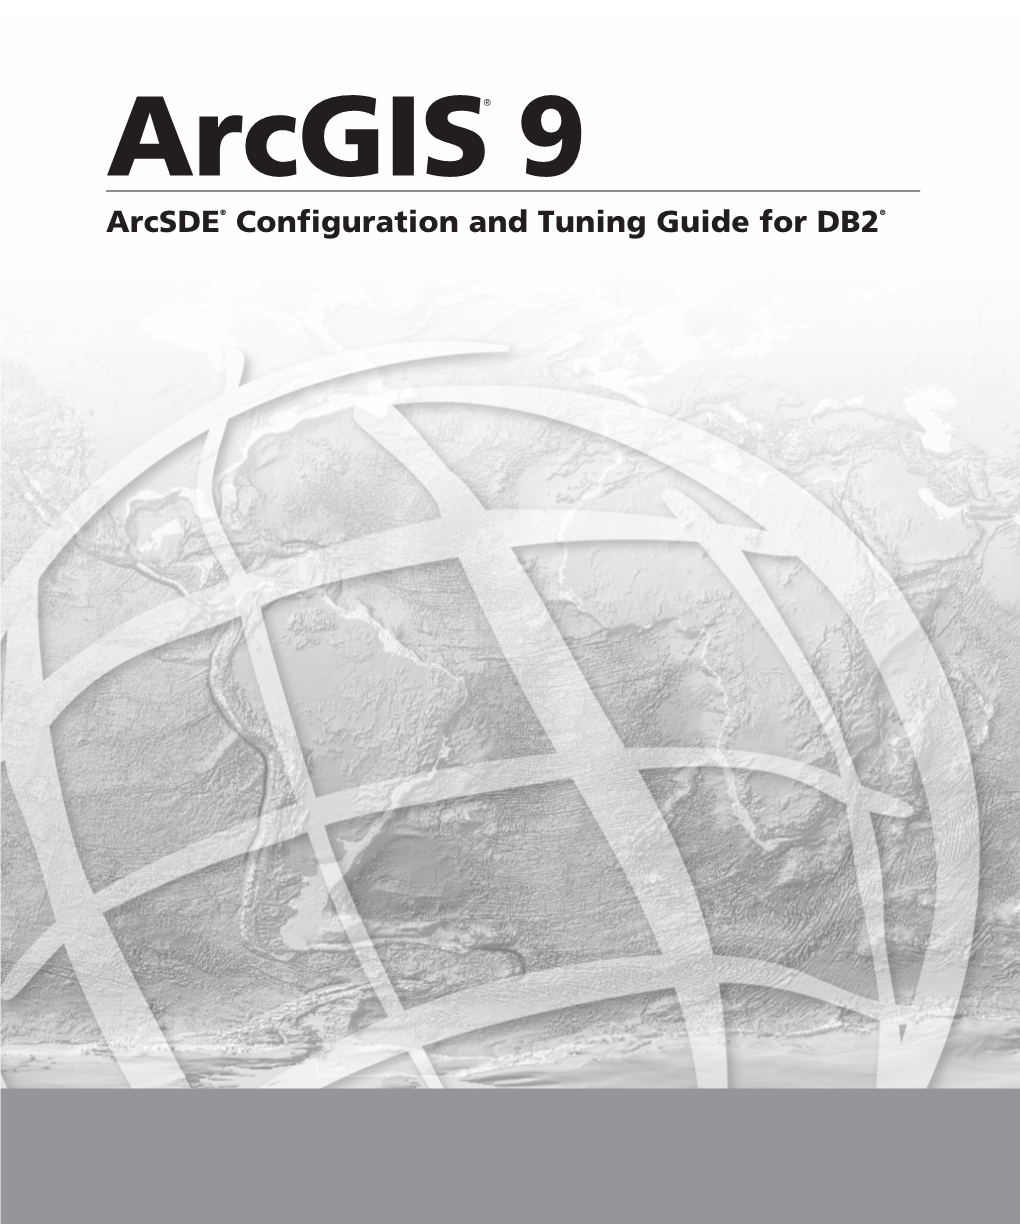 Arcsde Configuration and Tuning Guide for DB2